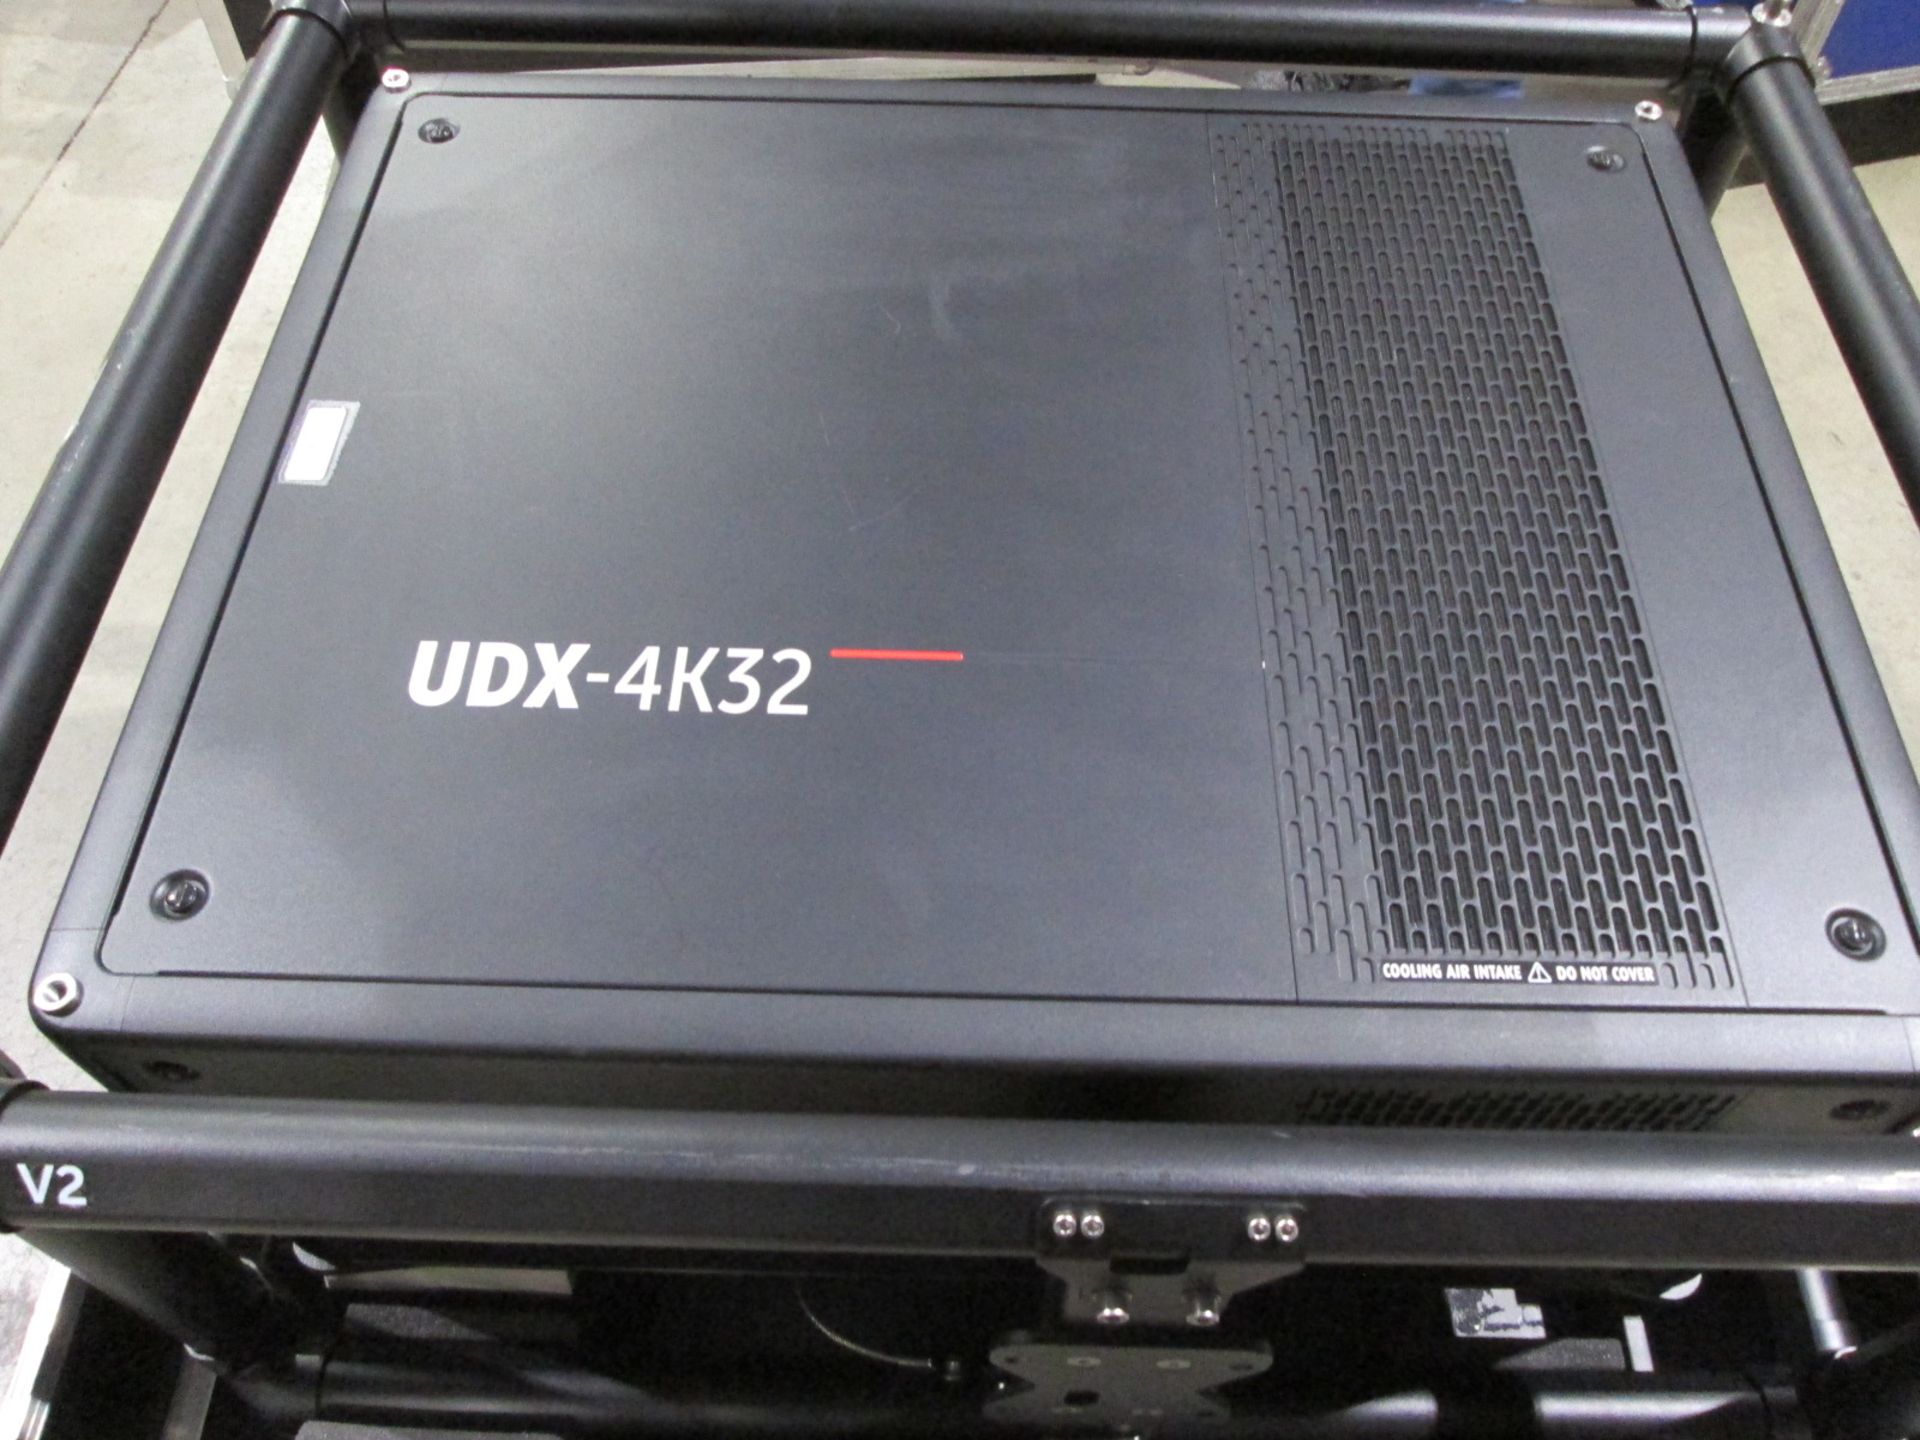 Barco BME UDX 4K32 FRM+FC Laser Projector. S/N R9008600-FC2590127930. In flight case with hanging br - Image 2 of 11